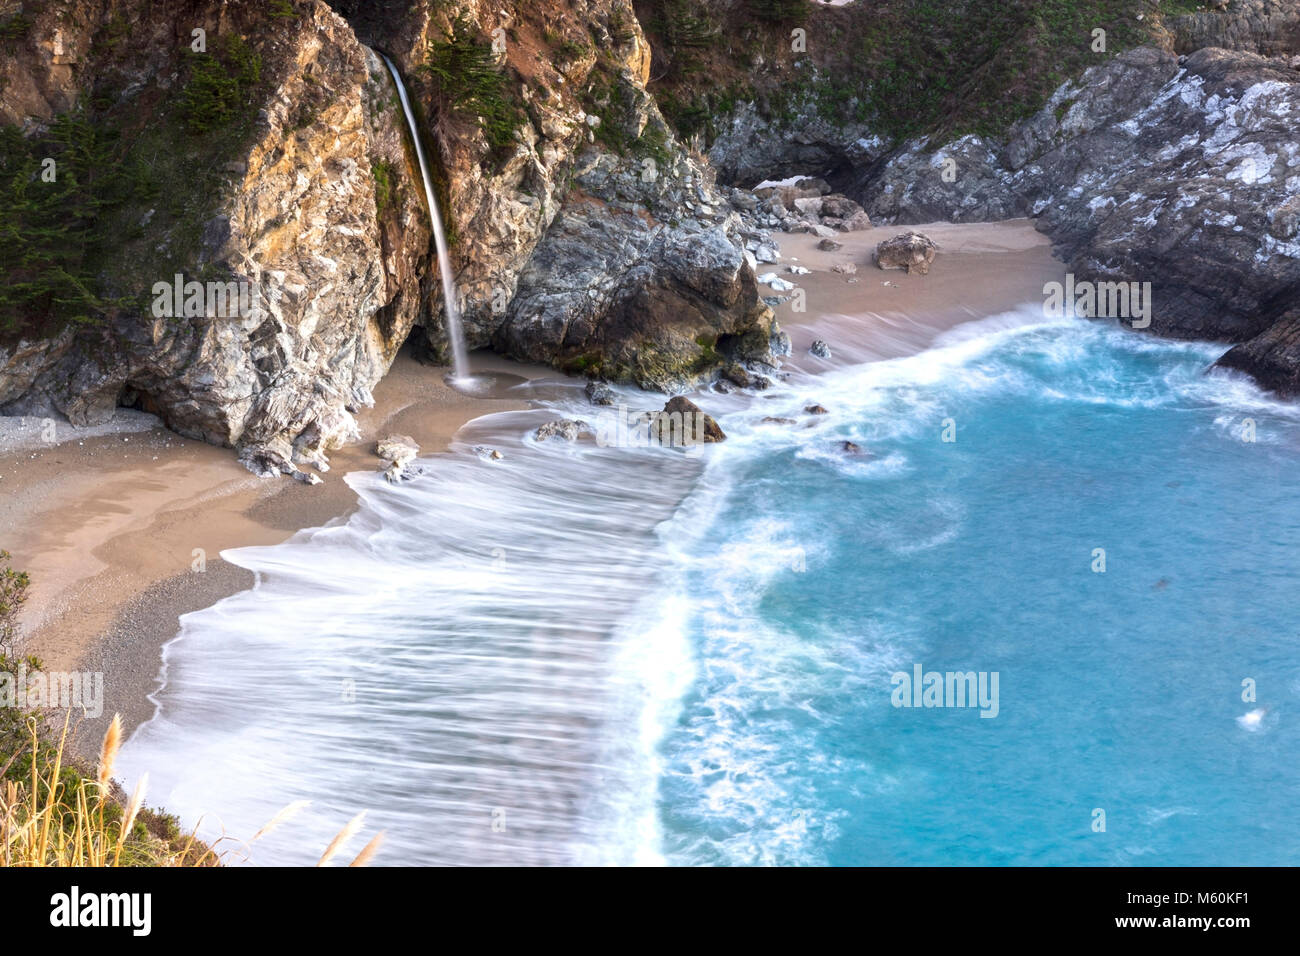 McWay Falls Scenic Waterfall Landscape Aerial Beach View on Big Sur Coast in Central California, Julia Pfeiffer Burns State Park Stockfoto